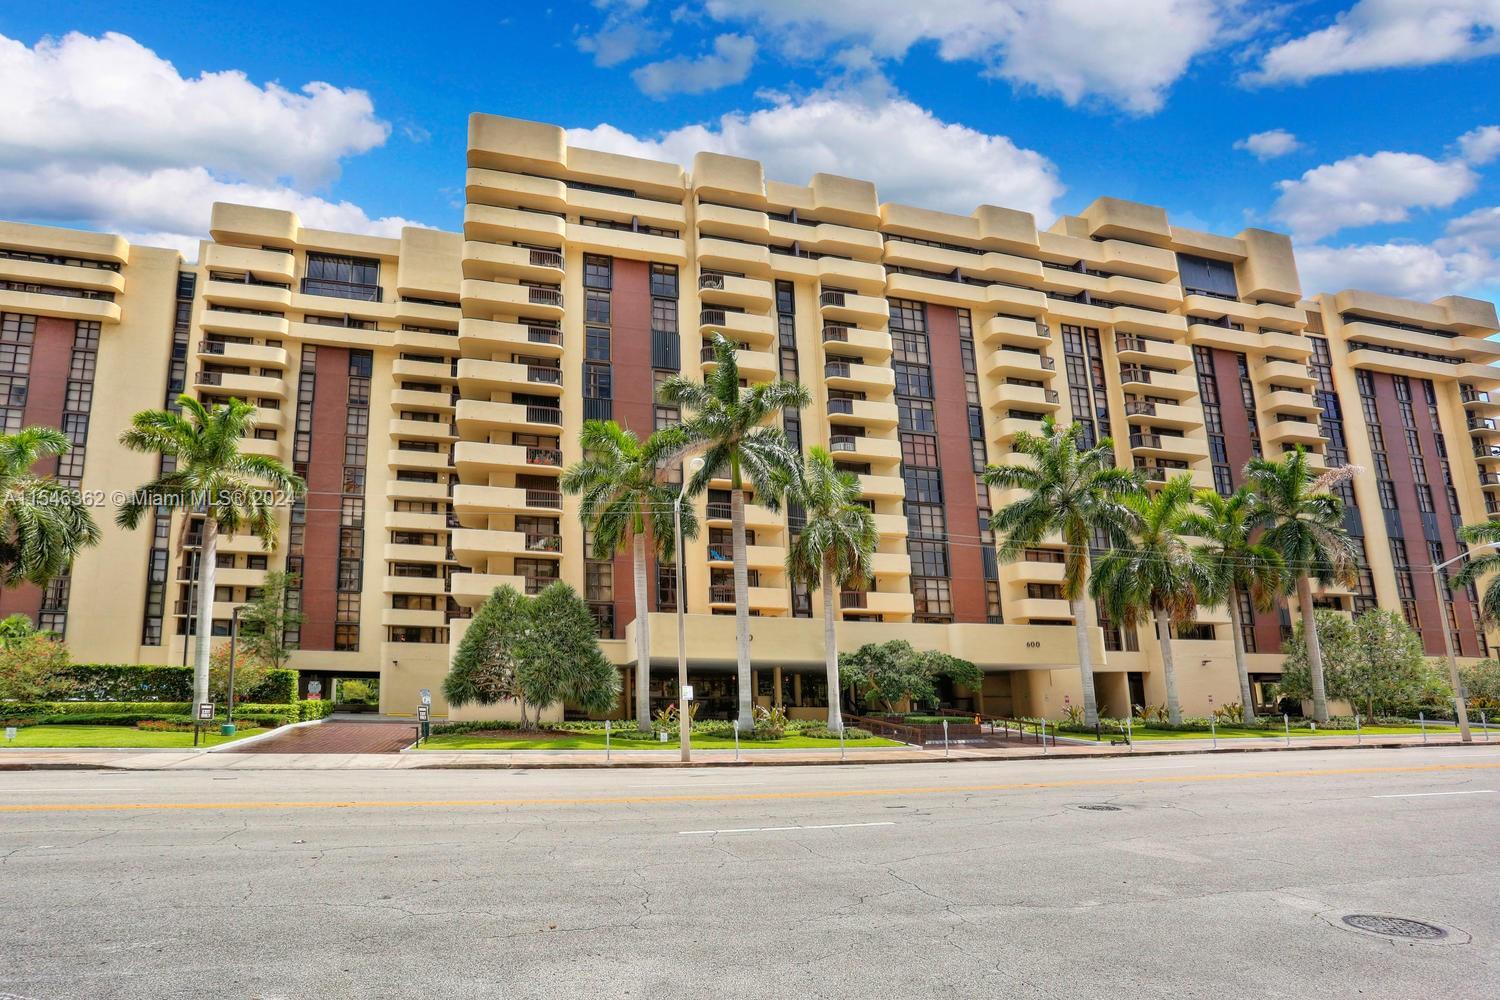 Photo of 600 Biltmore Wy #216 in Coral Gables, FL